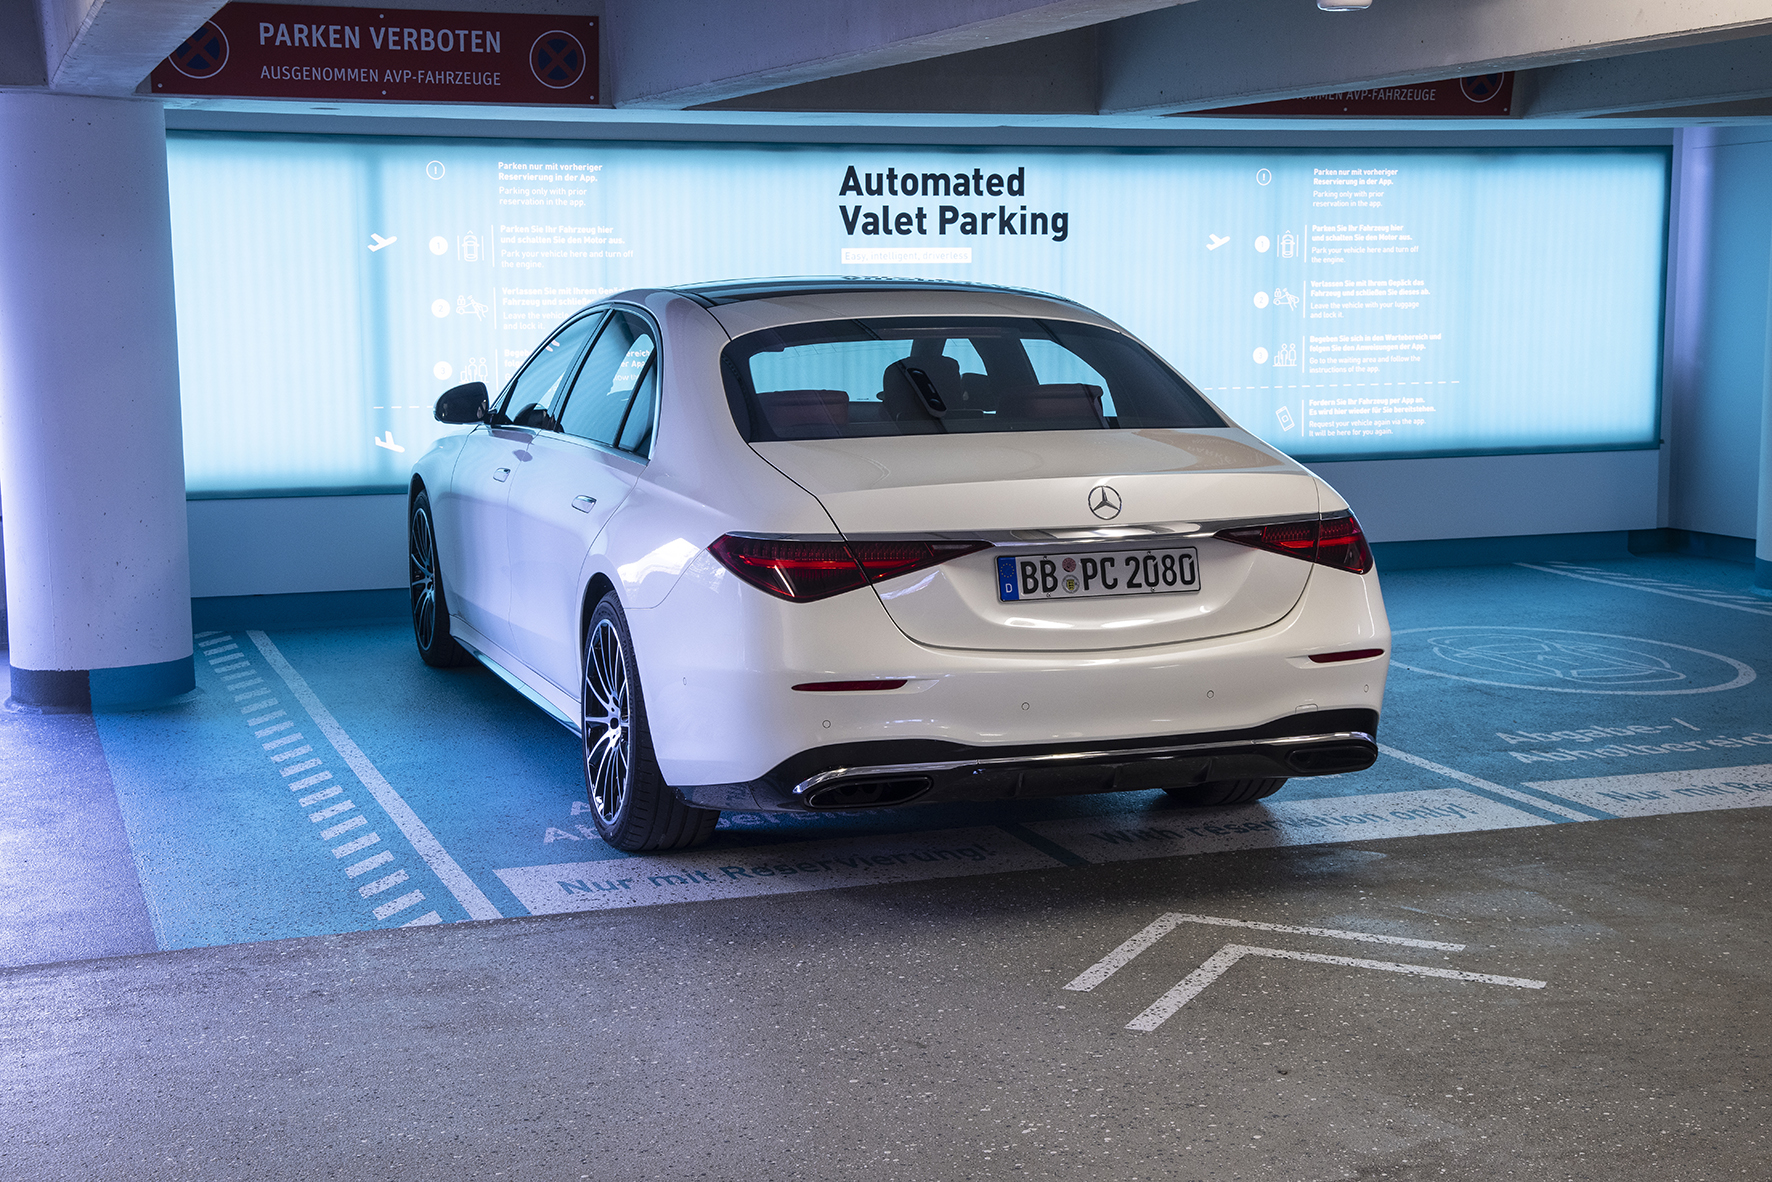 Connected vehicle and smart infrastructure enhance automated parking